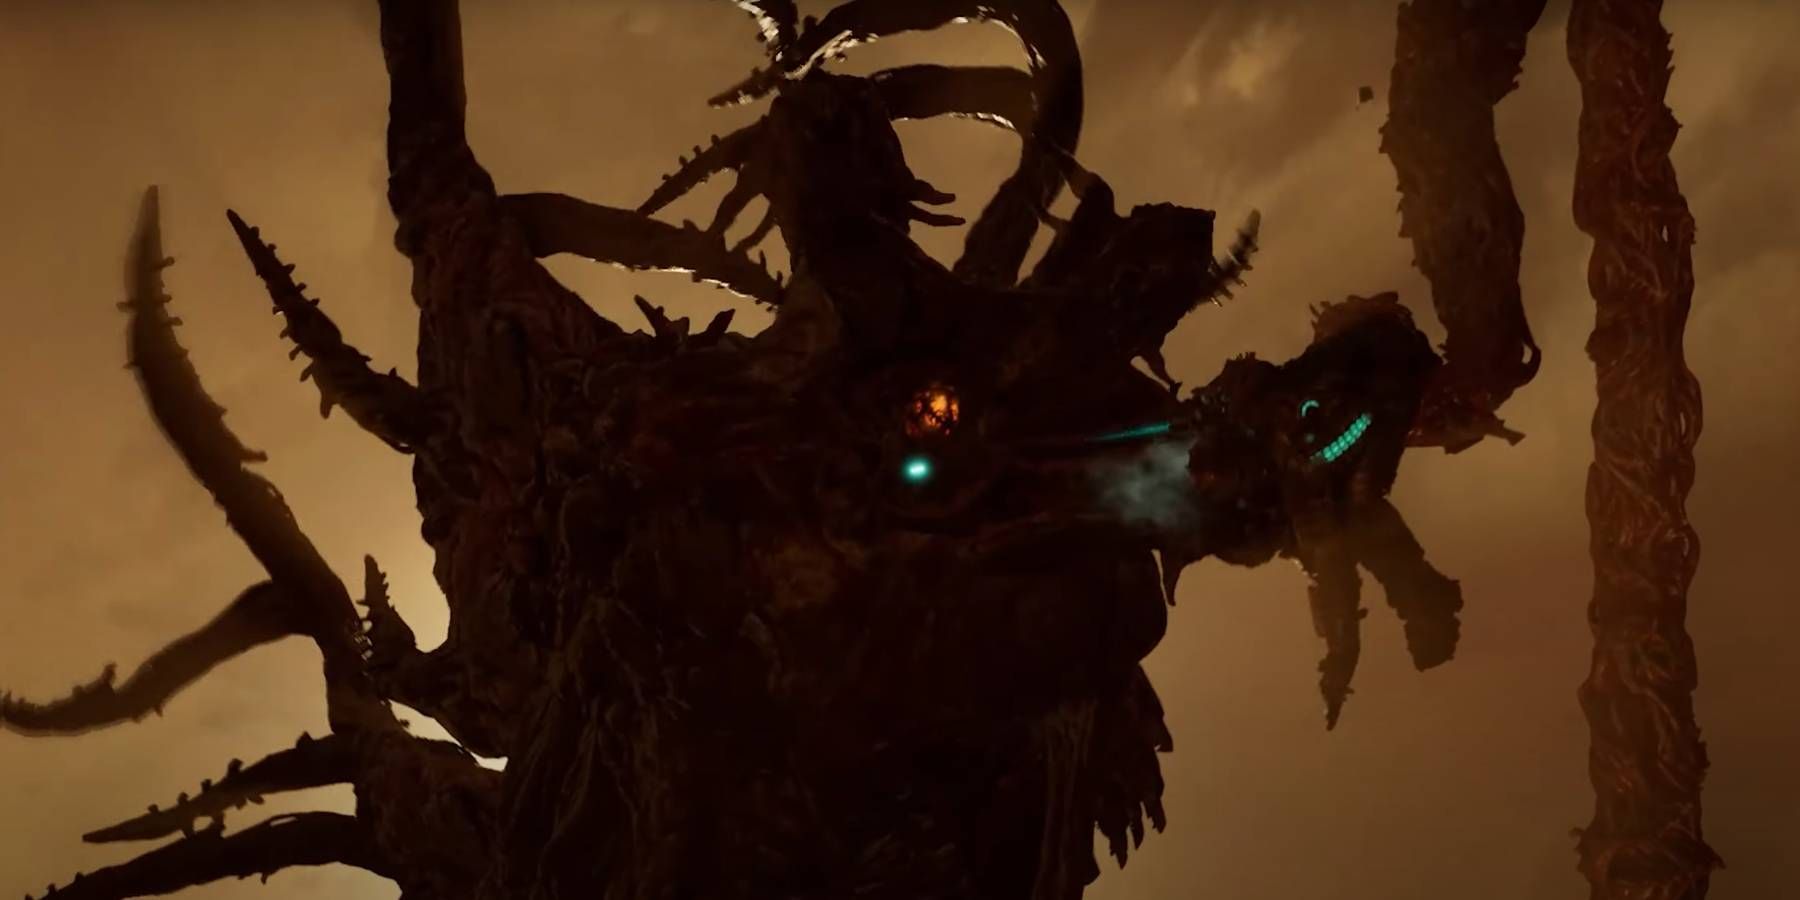 Dead Space Remake The Hive Mind Final Phase of Boss Fight Upside Down Aiming to Hit Final Yellow Cluster in Creature's Maw